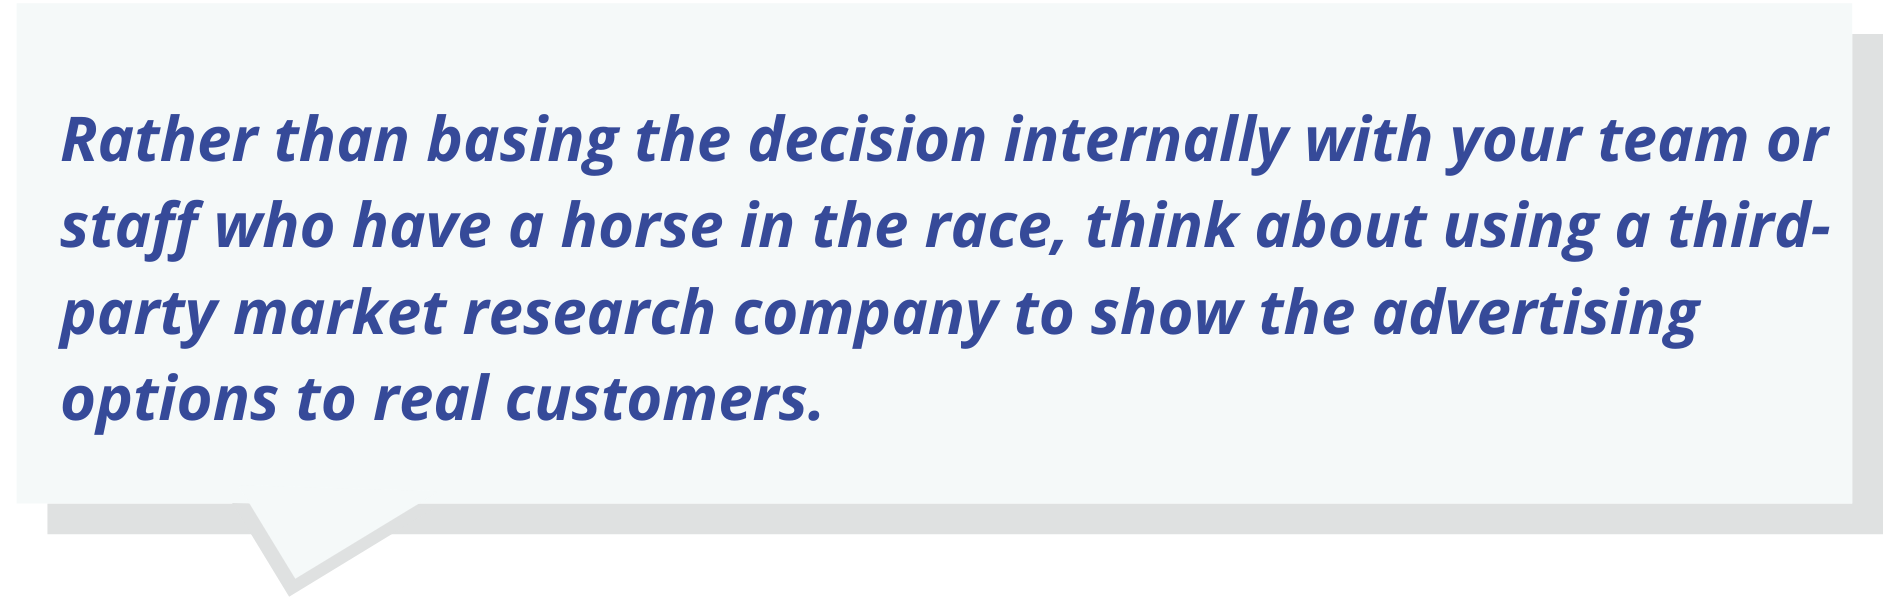 Rather than basing the decision internally with your team or staff who have a horse in the race, think about using a third-party market research company to show the advertising options to real customers.